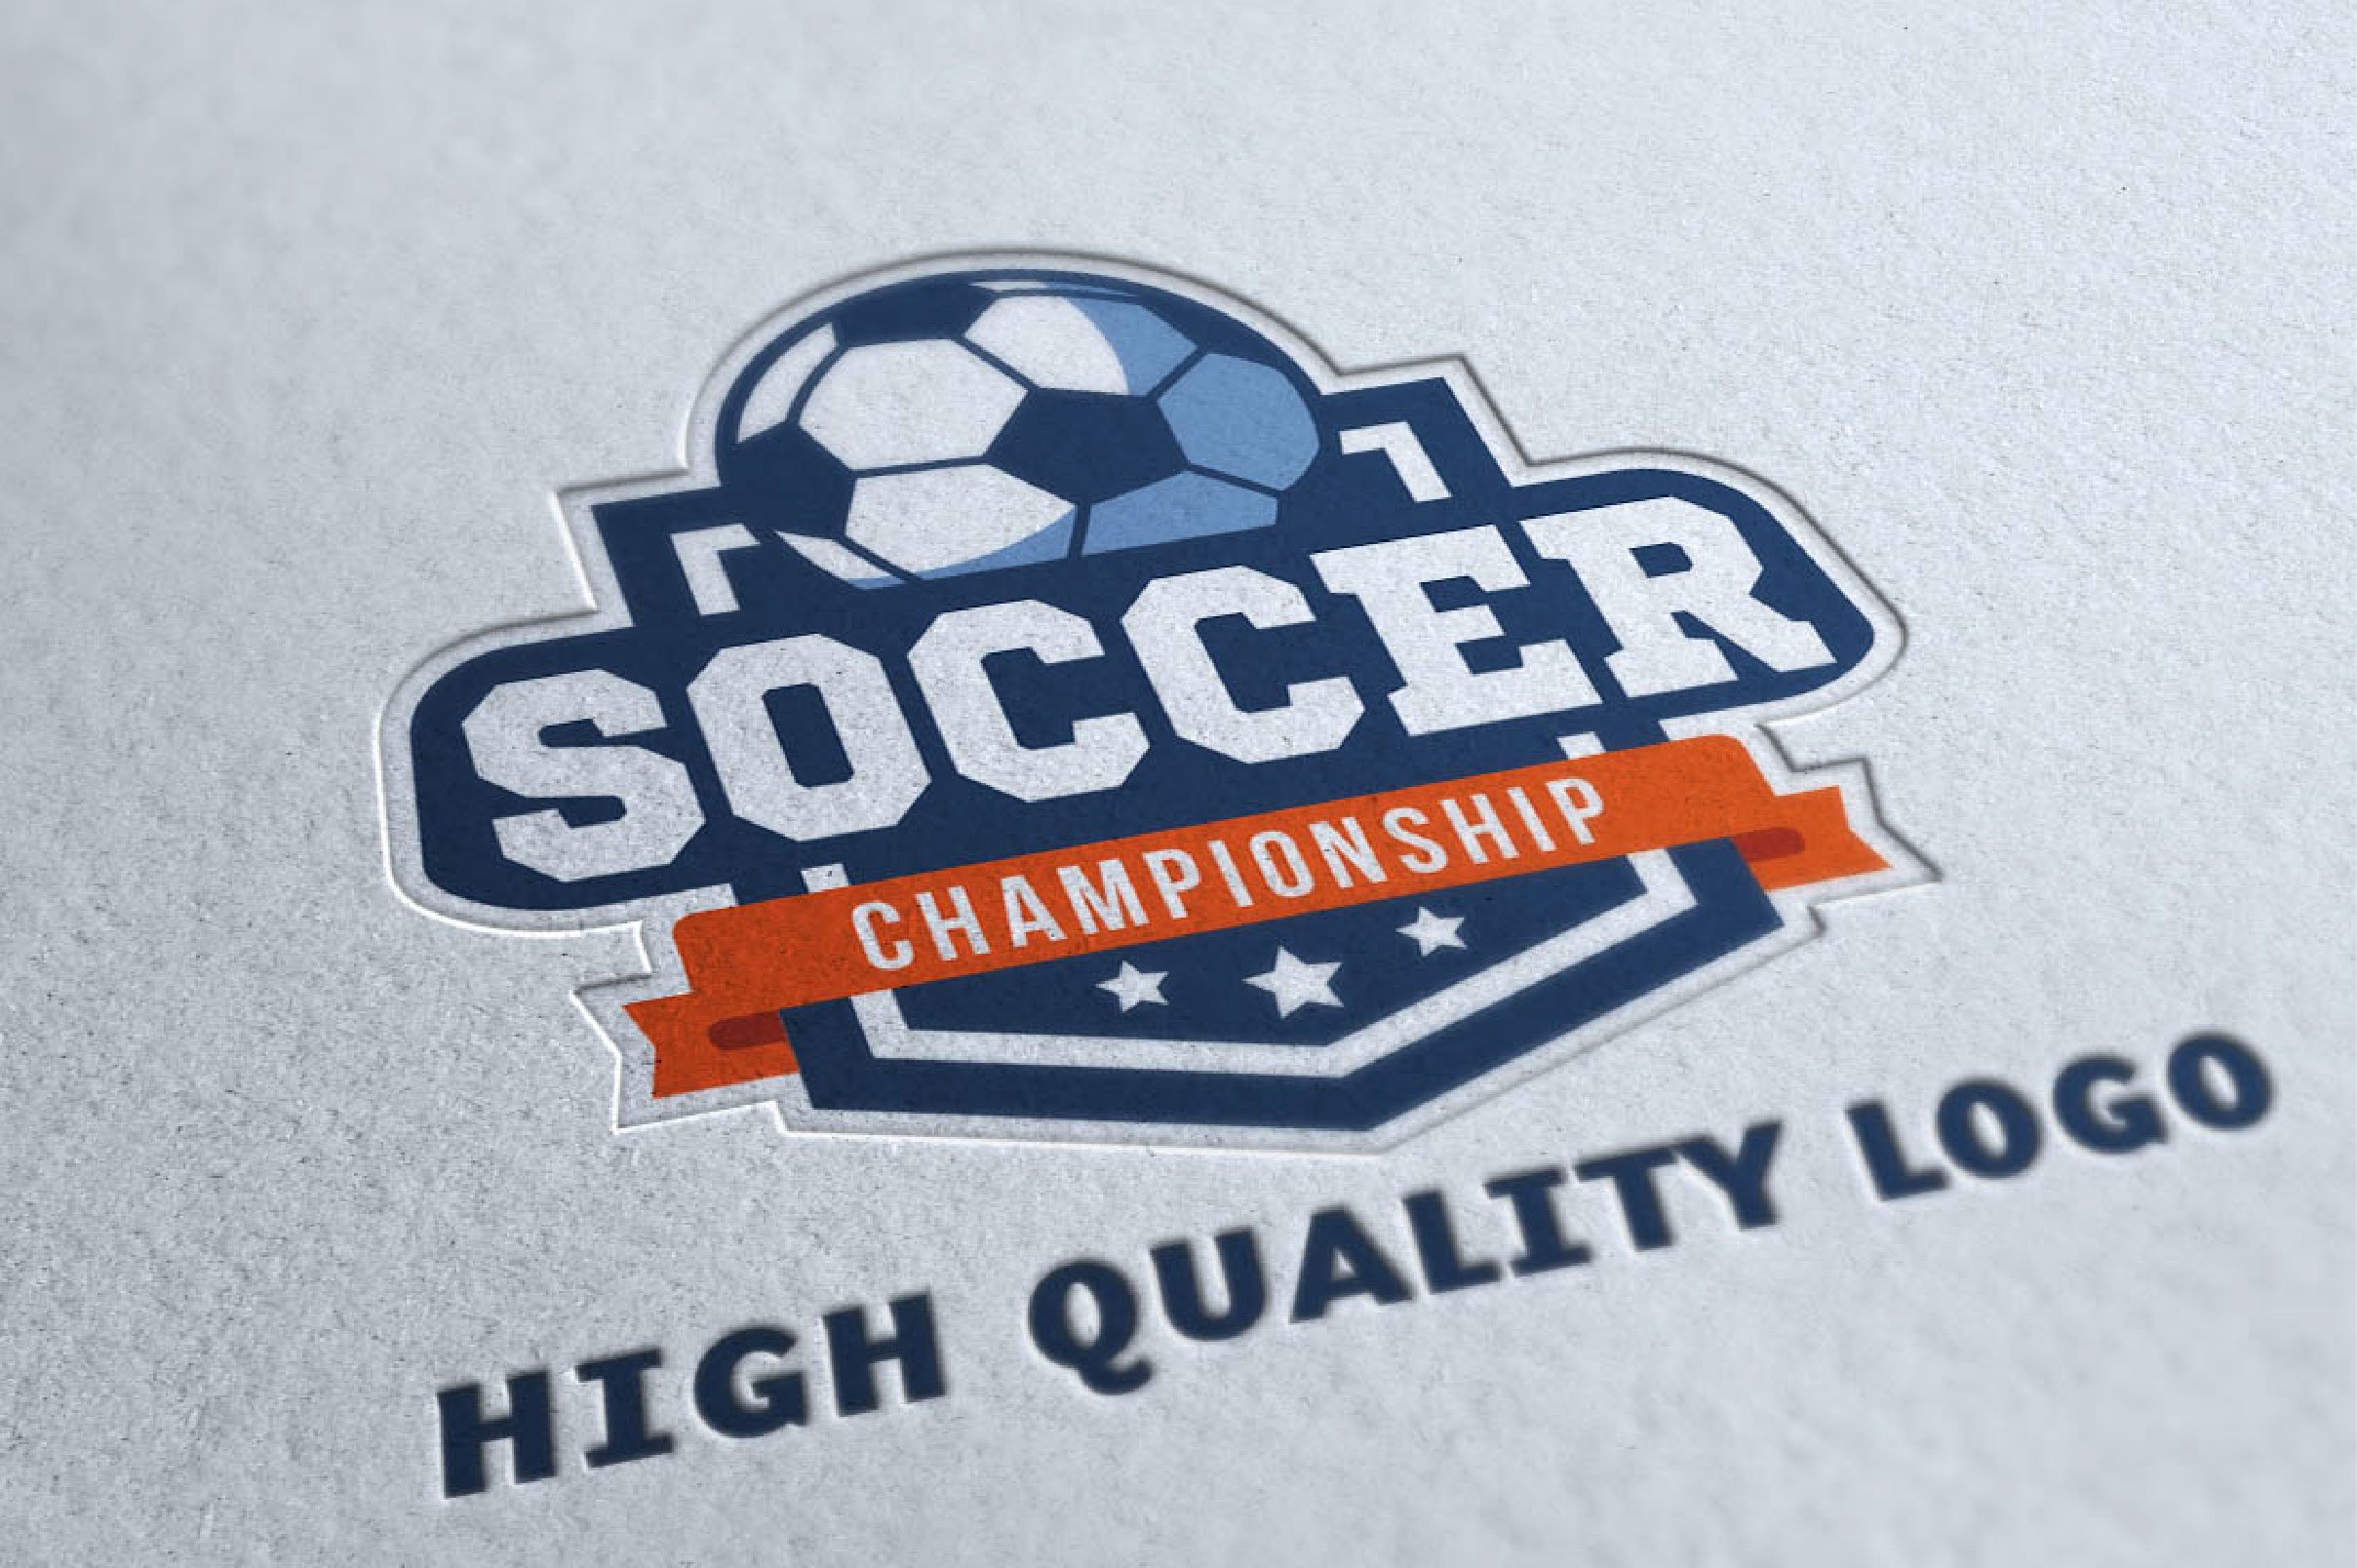 Matte grey paper with a classic soccer logo.